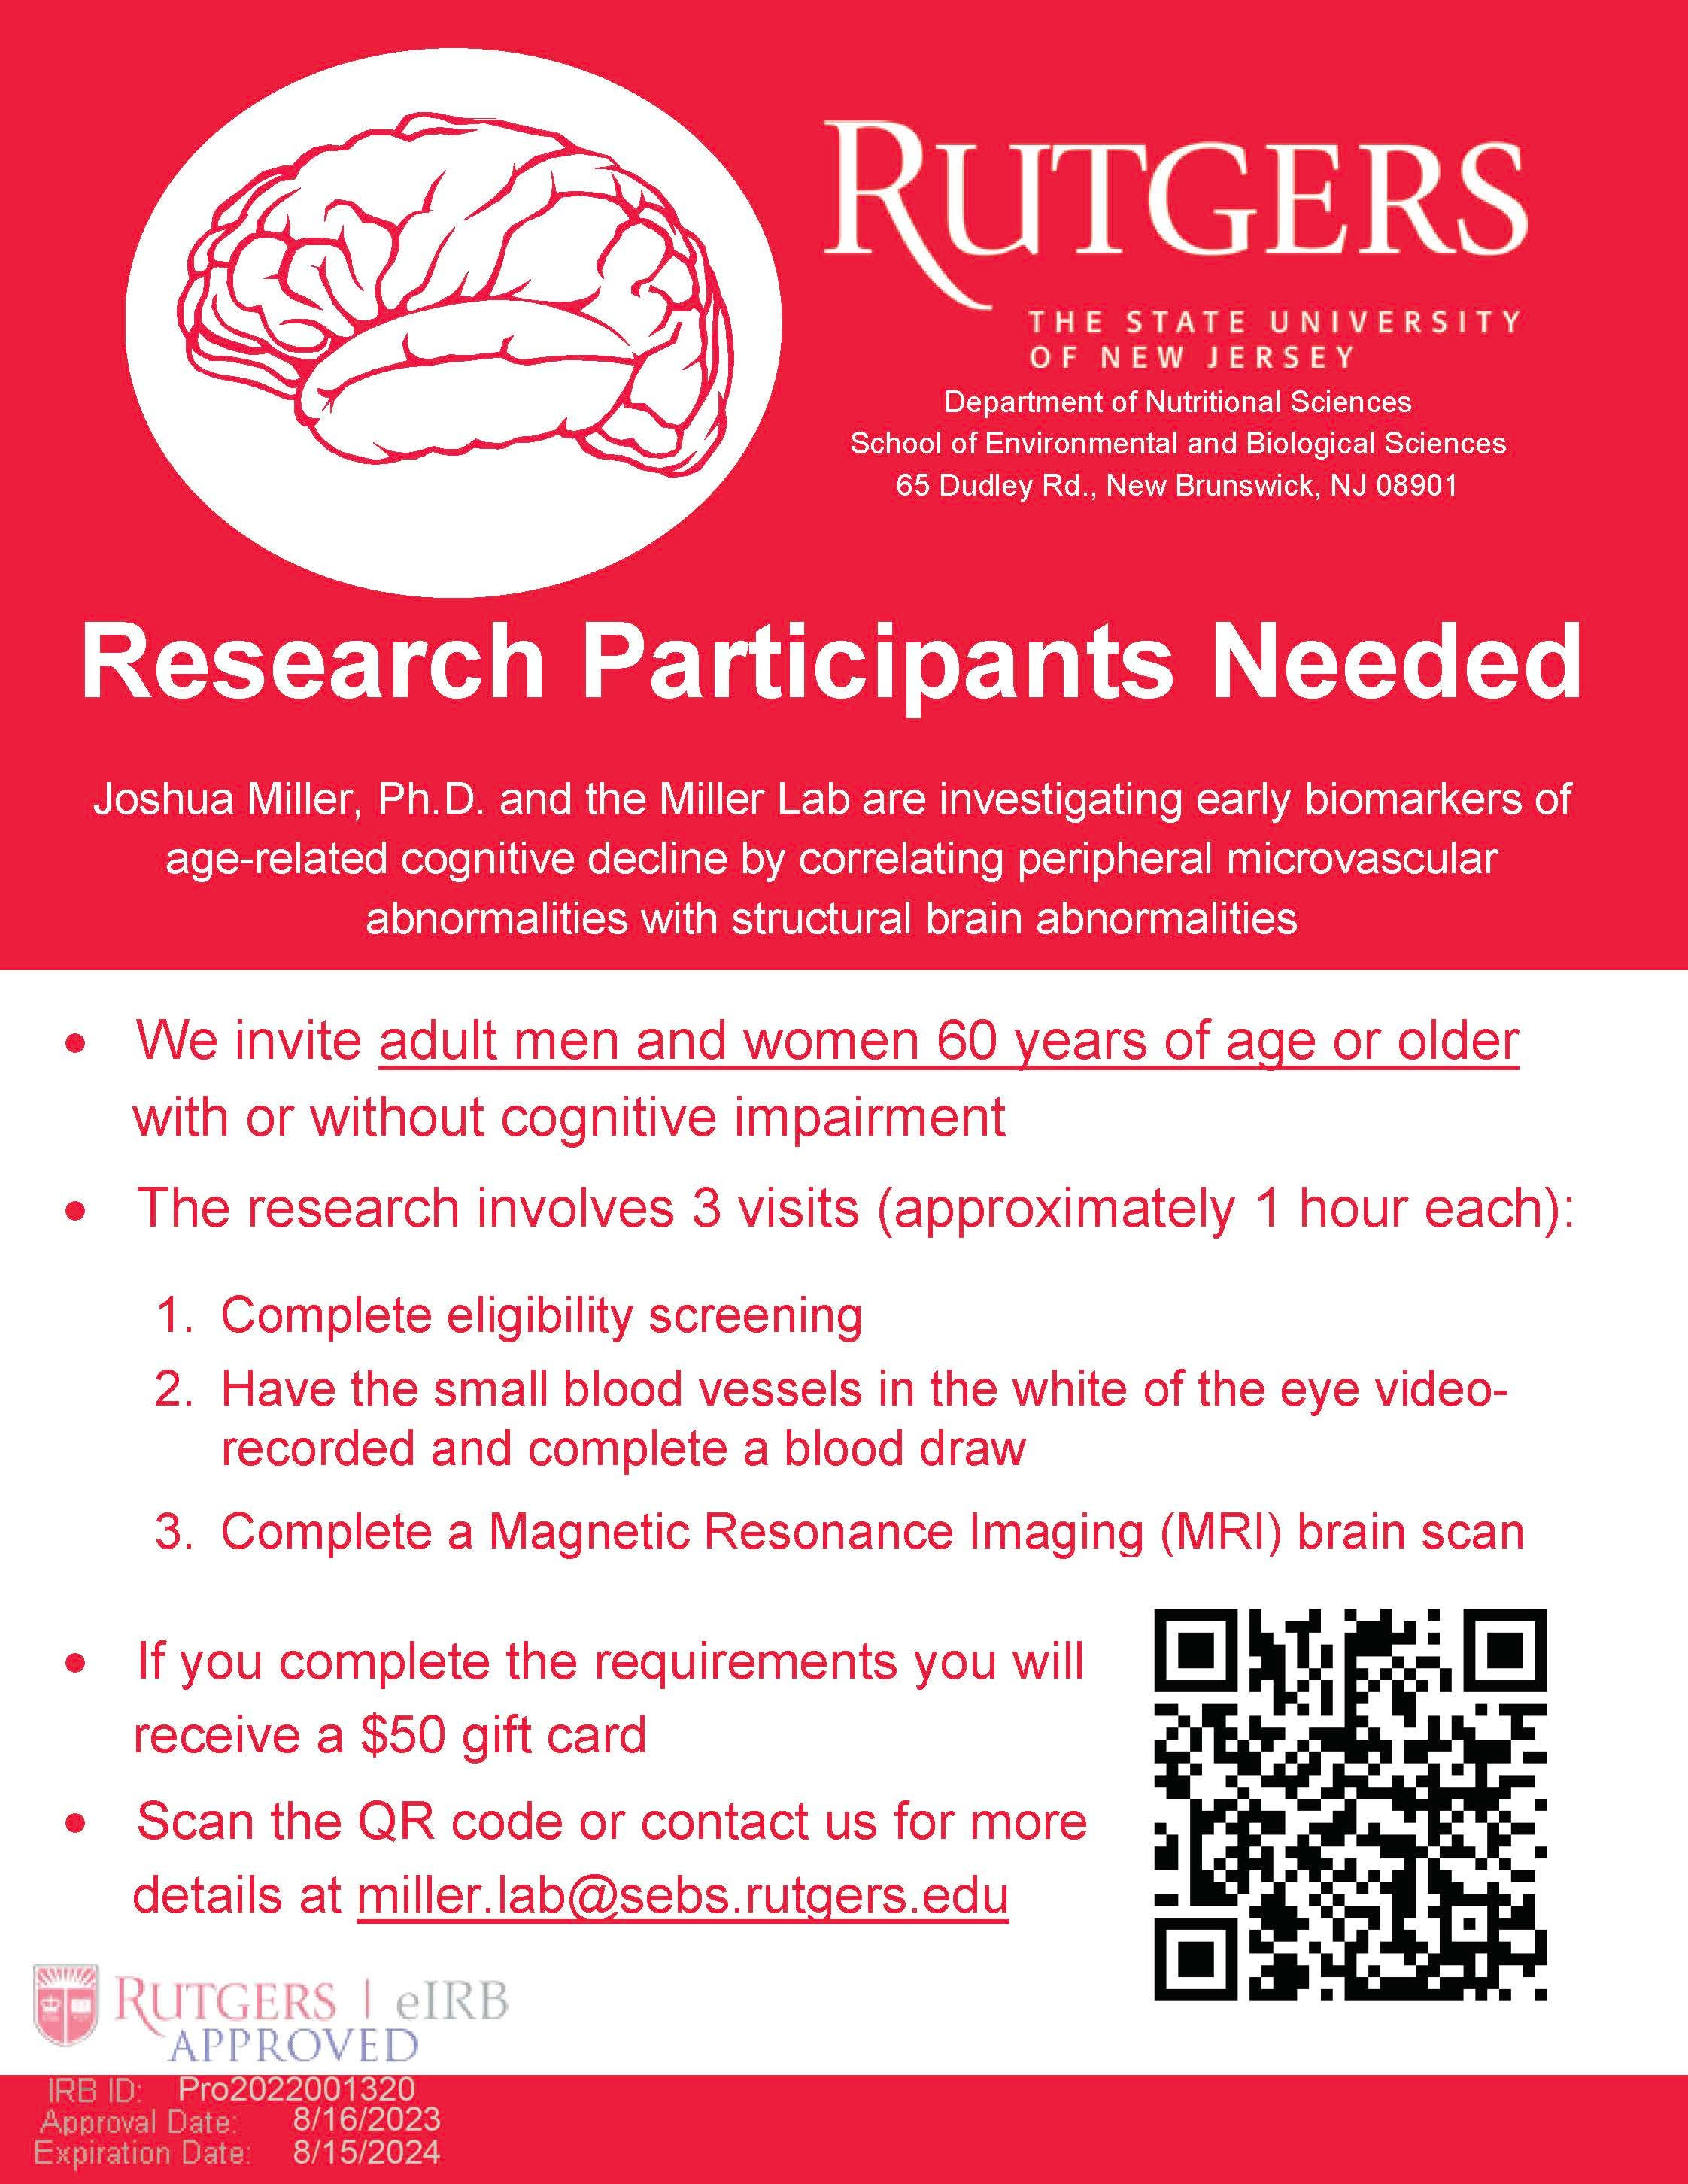 Participants Needed for a Study on Cognitive Decline at Rutgers University